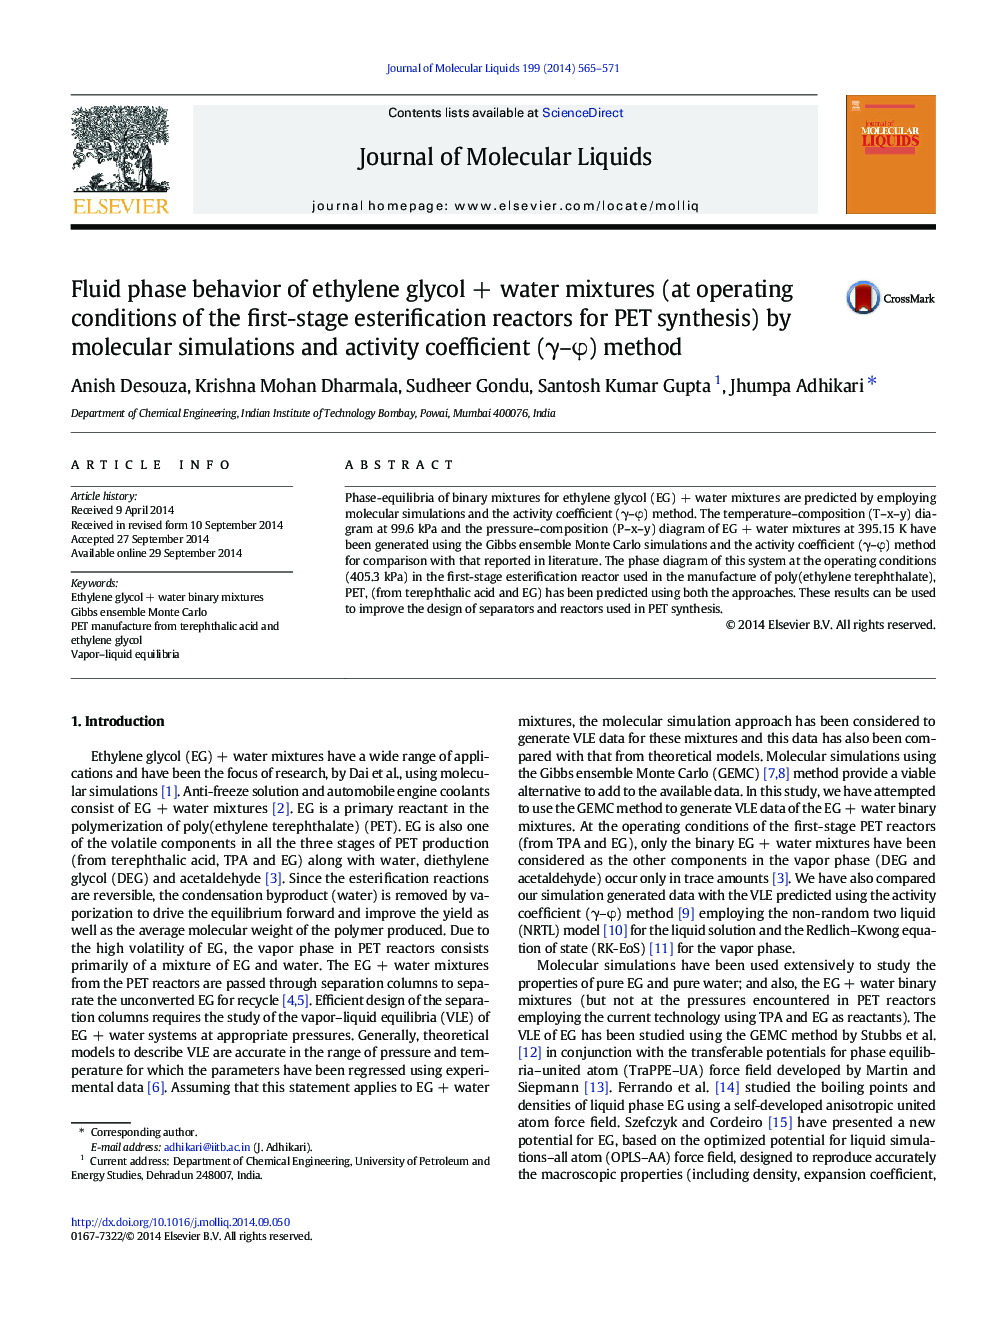 Fluid phase behavior of ethylene glycolÂ +Â water mixtures (at operating conditions of the first-stage esterification reactors for PET synthesis) by molecular simulations and activity coefficient (Î³-Ï) method